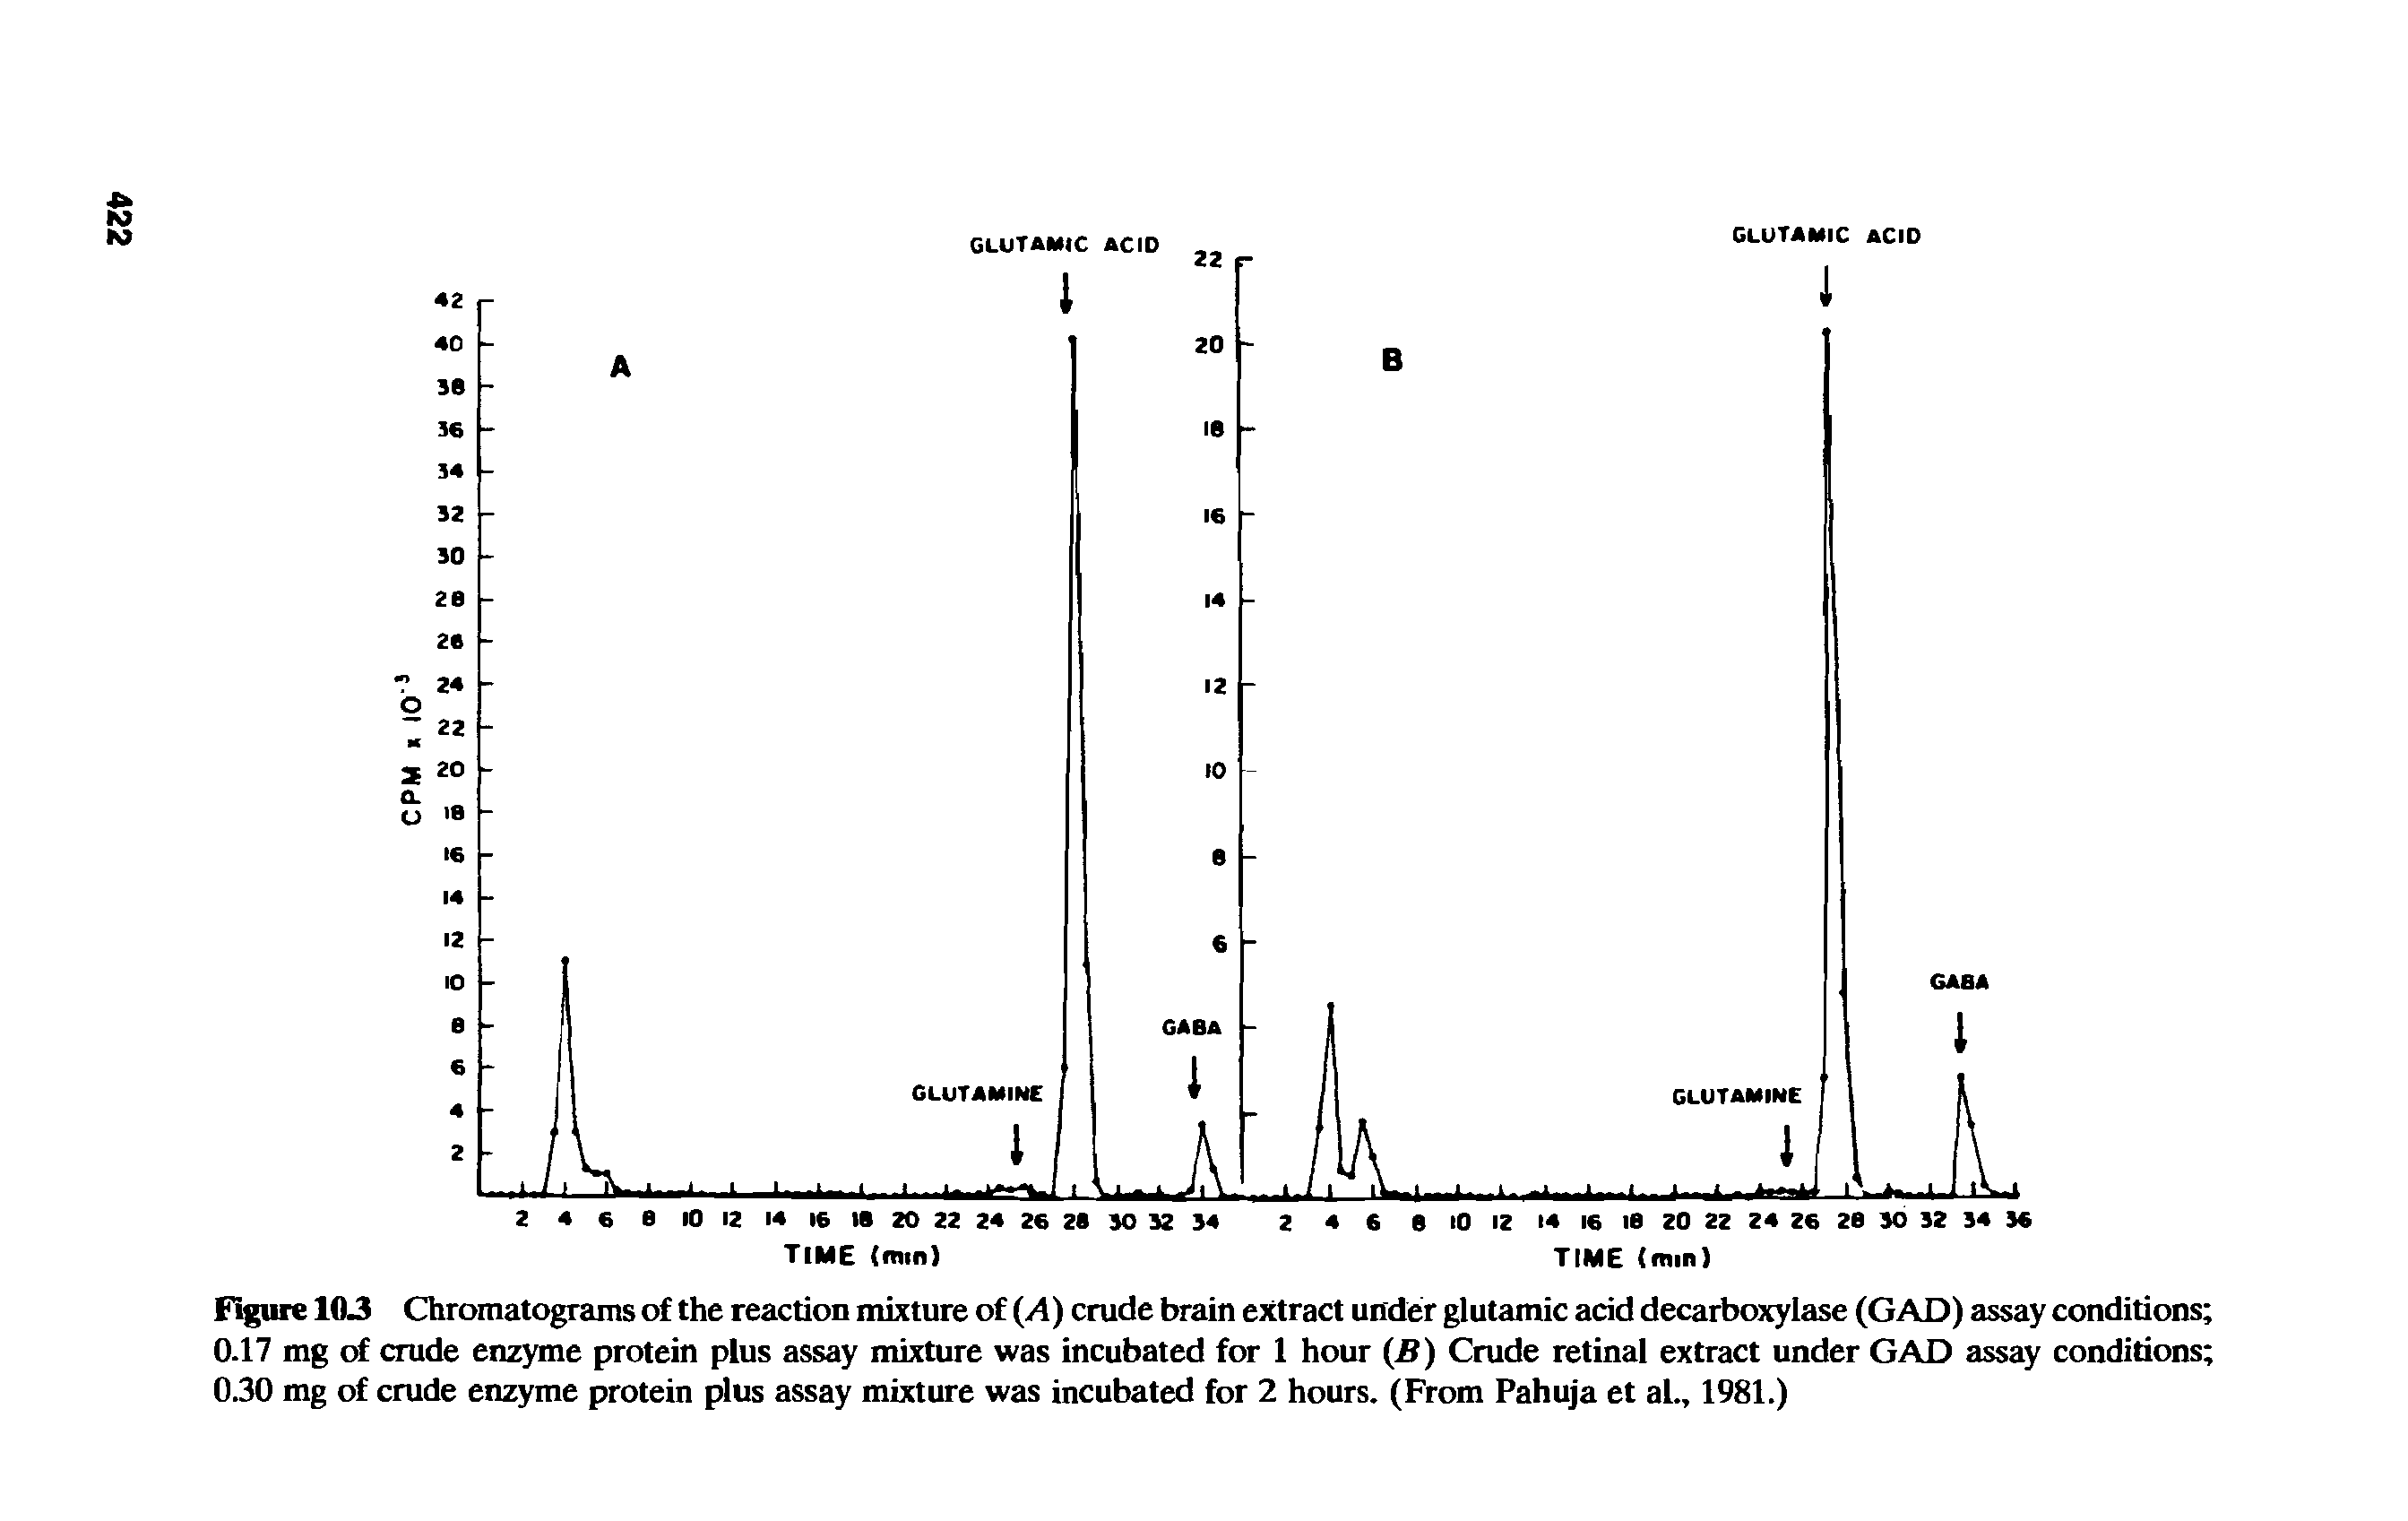 Figure 1(13 Chromatograms of the reaction mixture of (A) crude brain extract under glutamic acid decarboxylase (GAD) assay conditions 0.17 mg of crude enzyme protein plus assay mixture was incubated for 1 hour (B) Crude retinal extract under GAD assay conditions 0.30 mg of crude enzyme protein plus assay mixture was incubated for 2 hours. (From Pahuja et al., 1981.)...